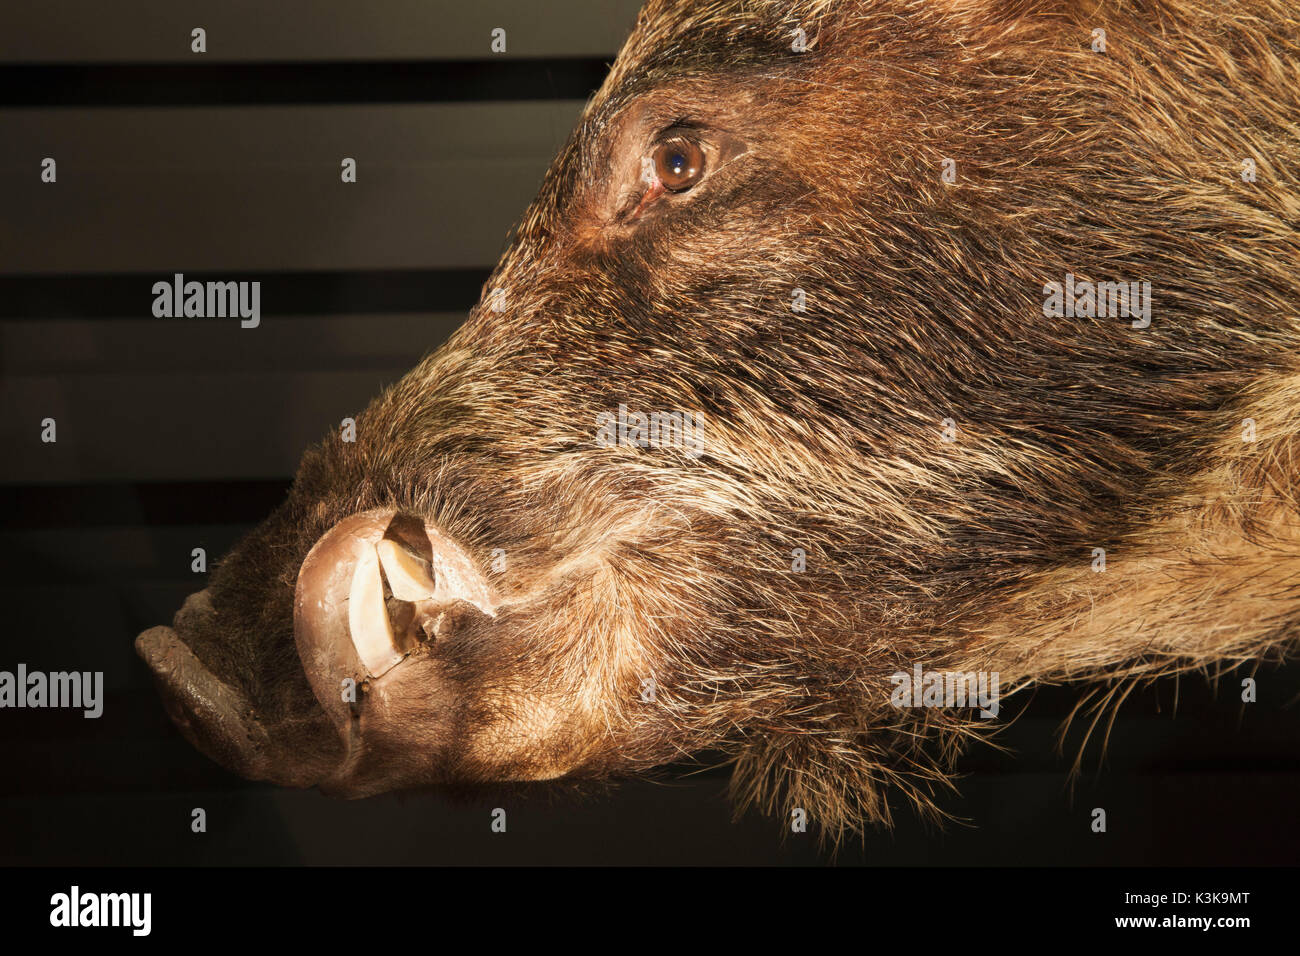 Japan, Hoshu, Tokyo, Ueno Park, National Museum of Nature and Science, Exhibit of Japanese Wild Boar Stock Photo